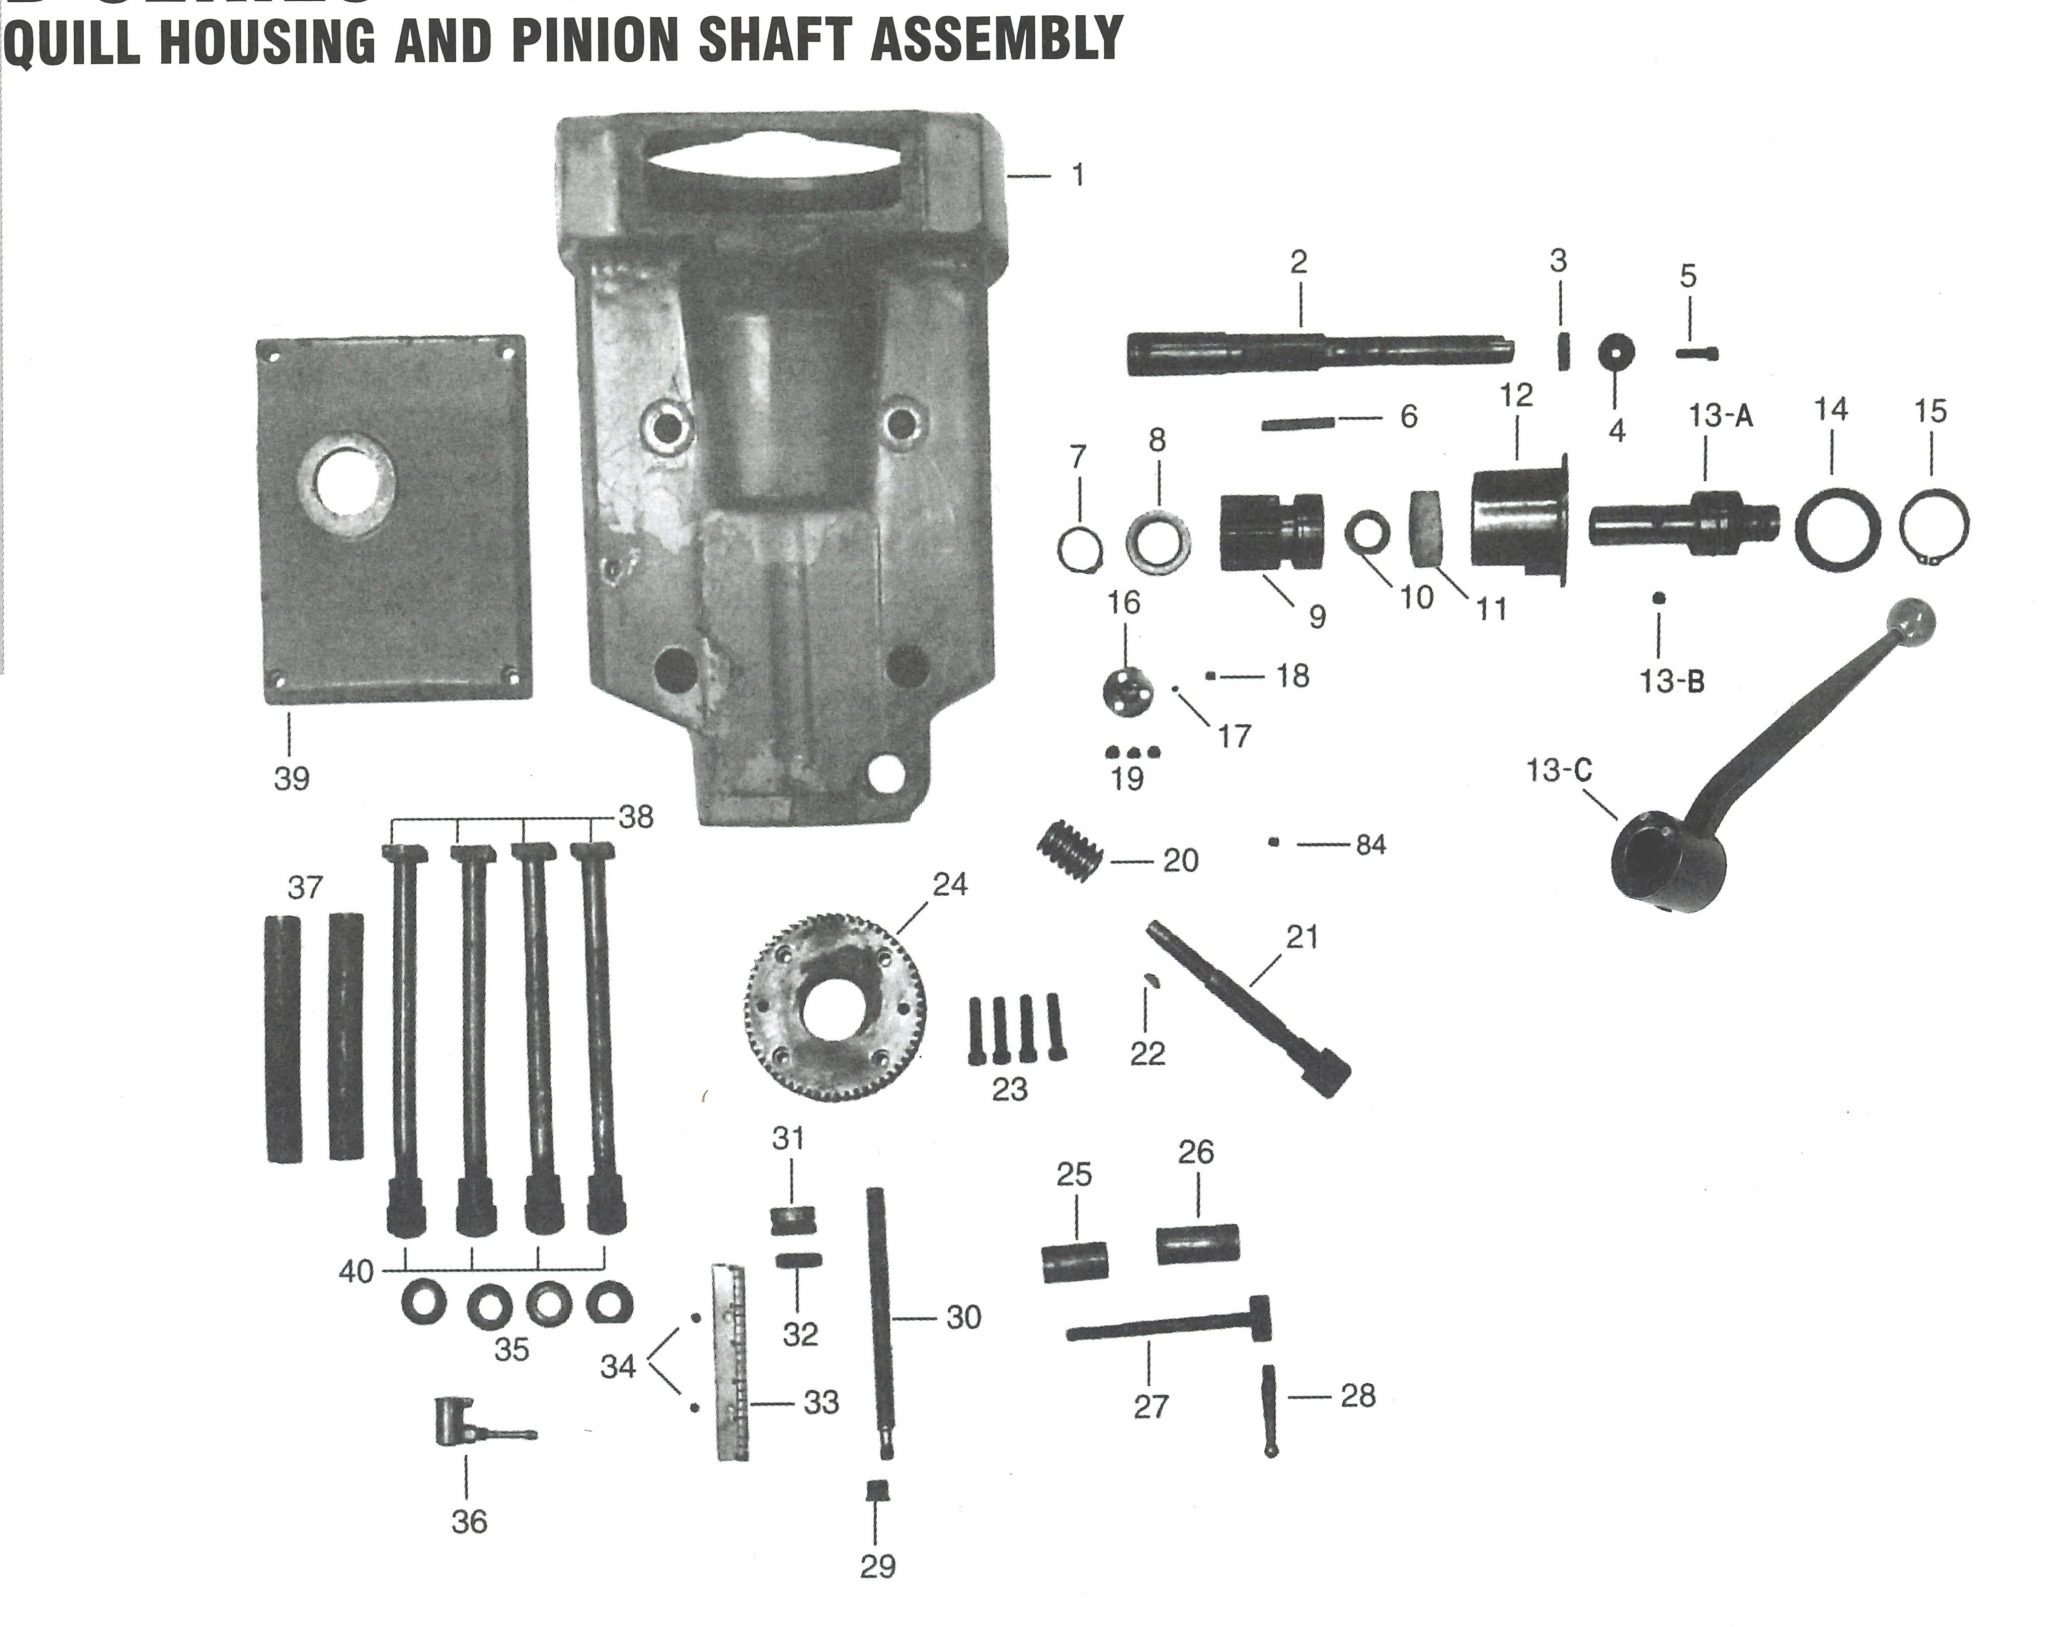 Quill Housing and Pinion Shaft Assembly 4 HP Breakdown